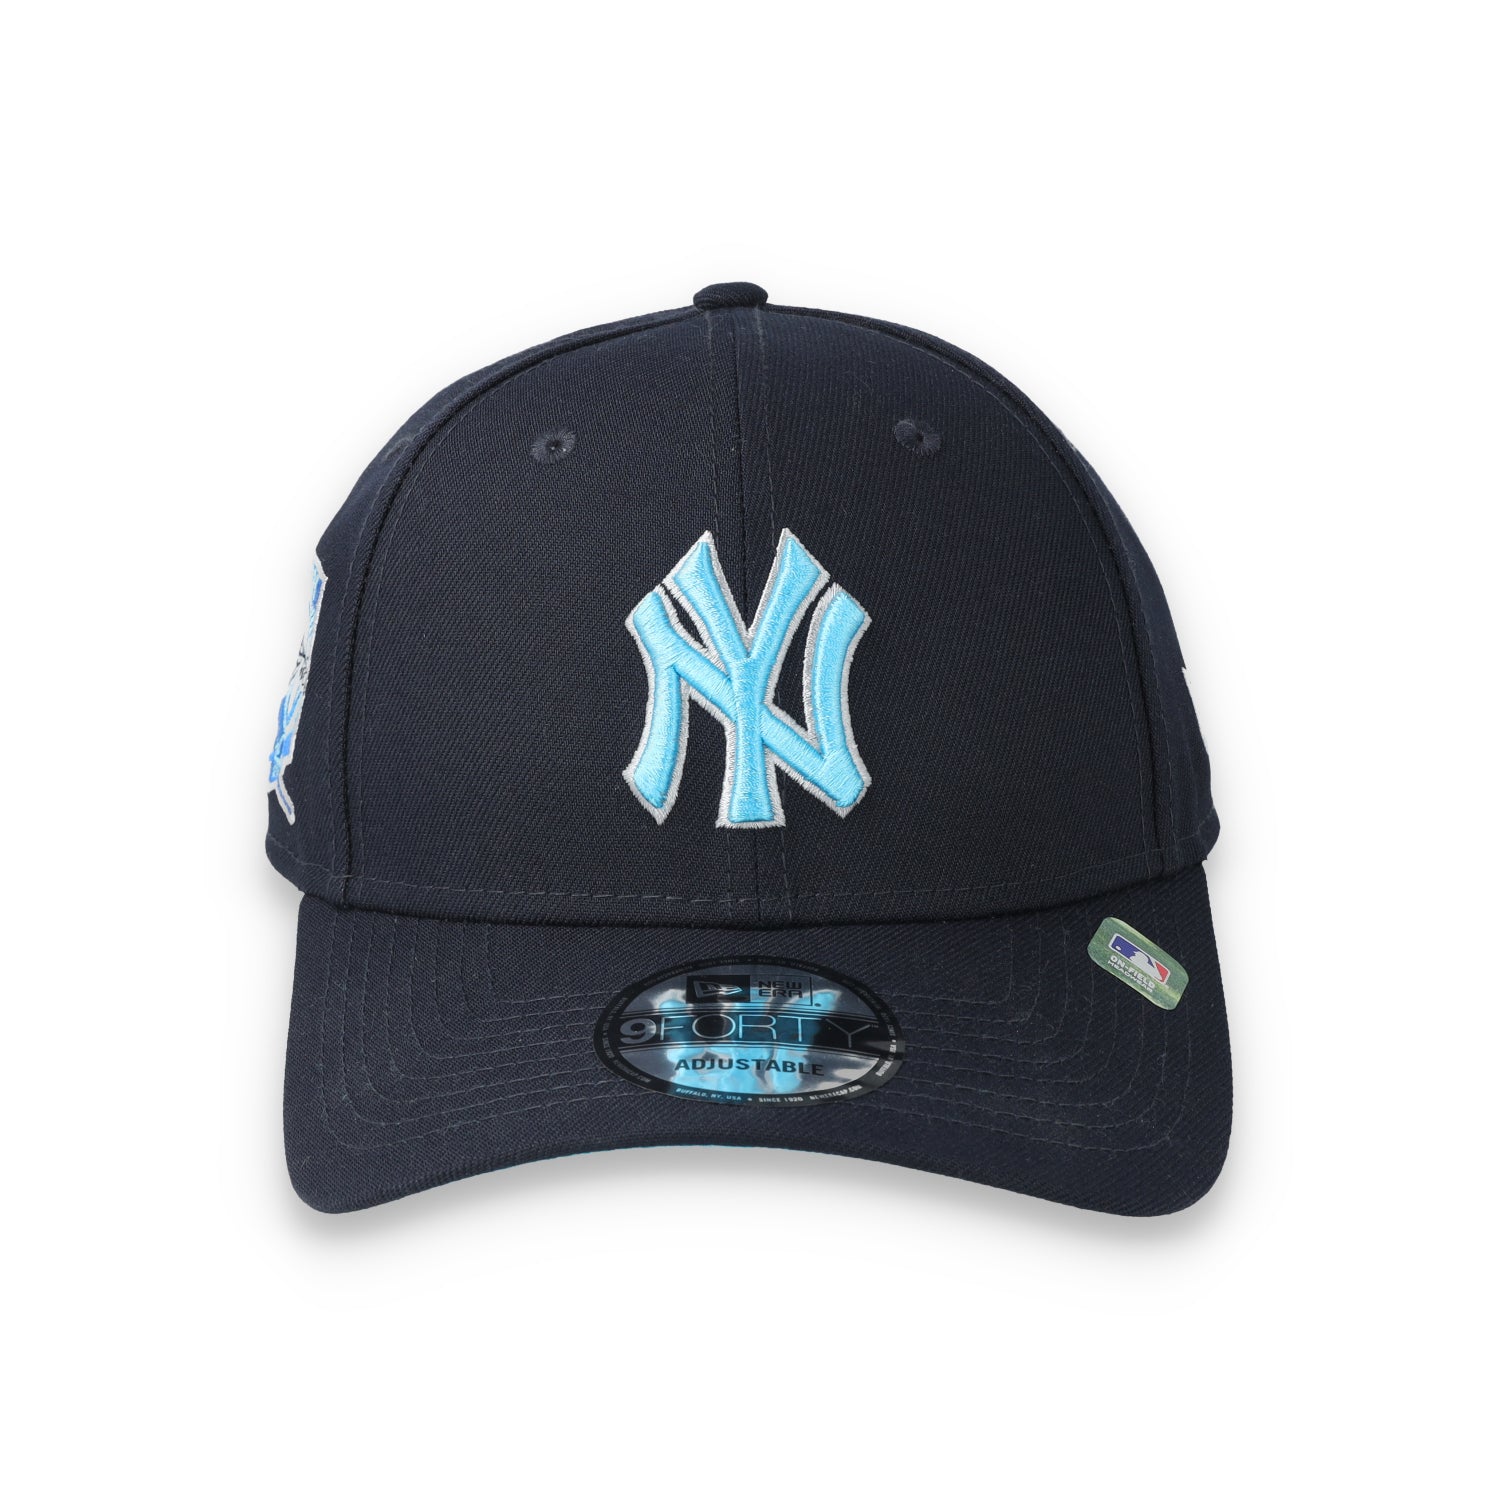 New Era New York Yankees Father's Day 9FORTY Adjustable Hat